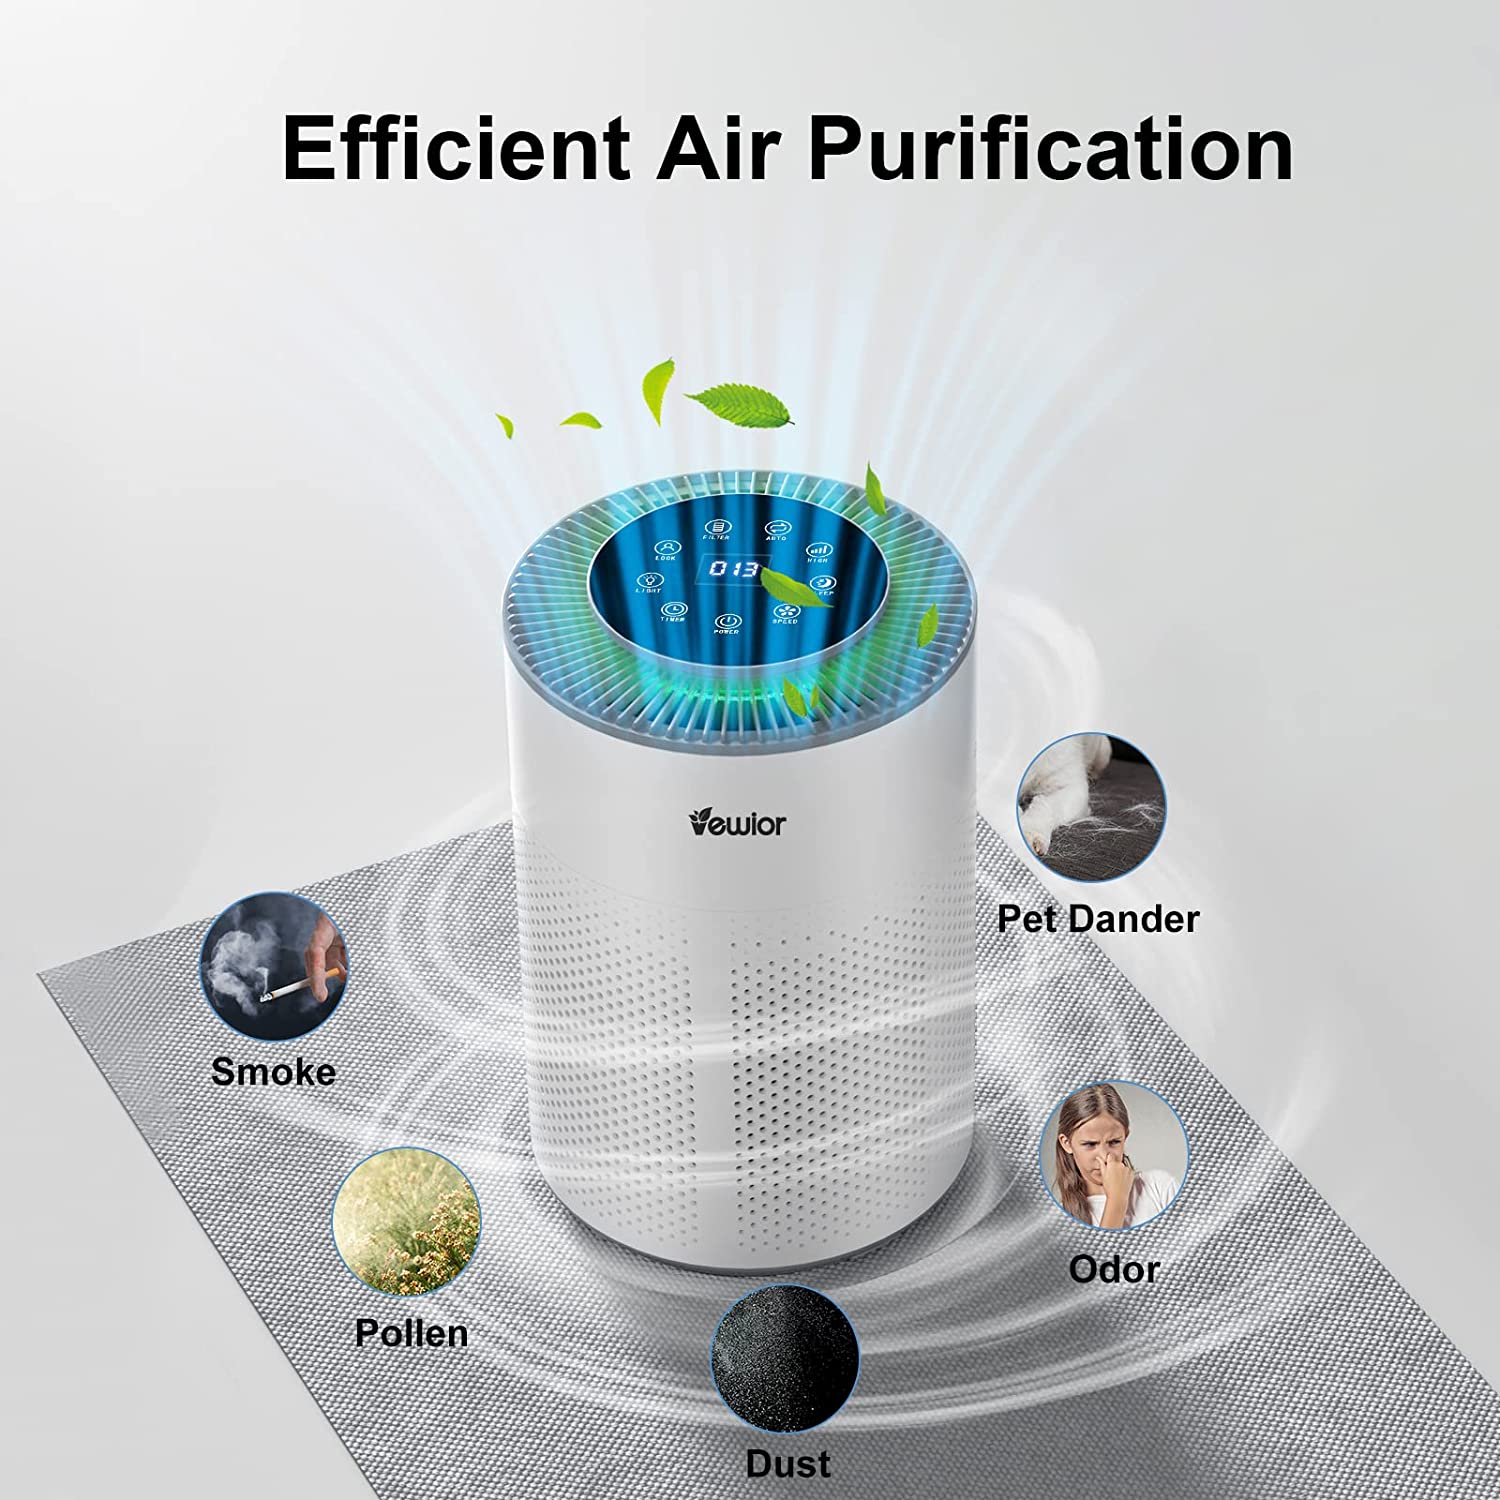 Air Purifiers, Home Air purifier for Large Room Bedroom Up to